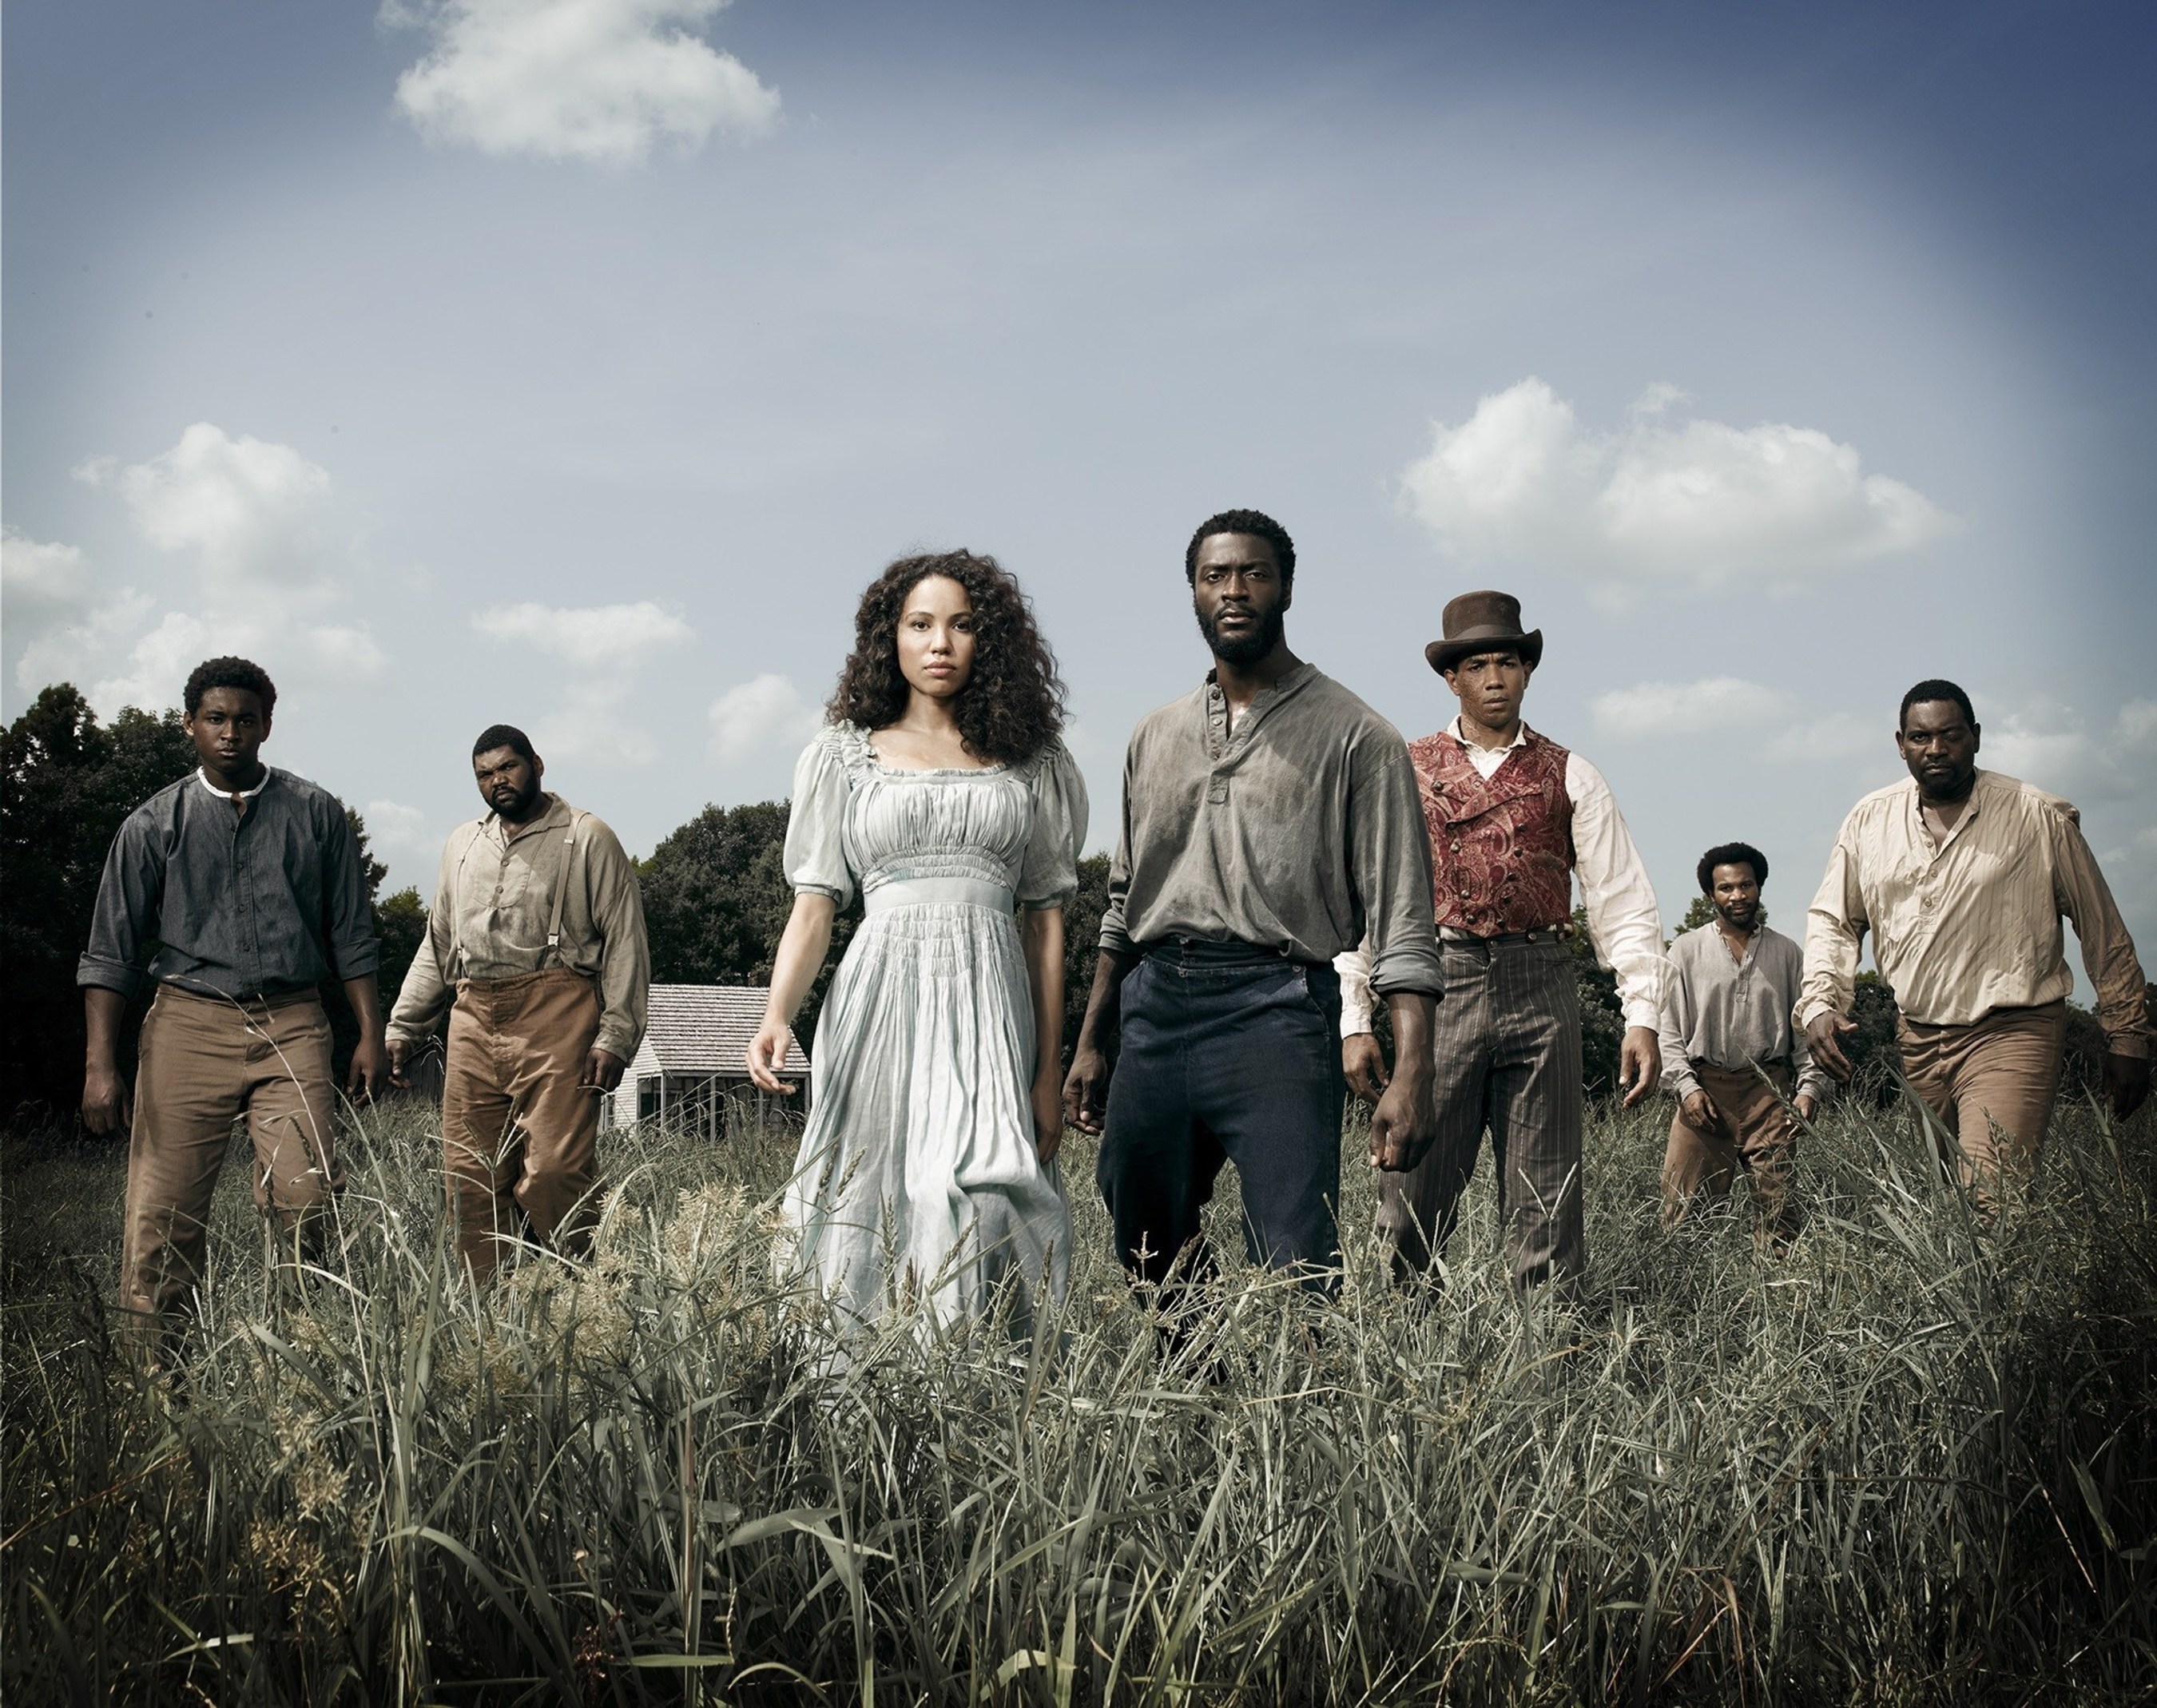 (LEFT TO RIGHT):  Renwick Scott as Henry, Theodus Crane as Zeke, Jurnee Smollett-Bell as Rosalee, Aldis Hodge as Noah, Alano Miller as Cato, Johnny Ray Gill as Sam, and Mykelti Williamson as Moses